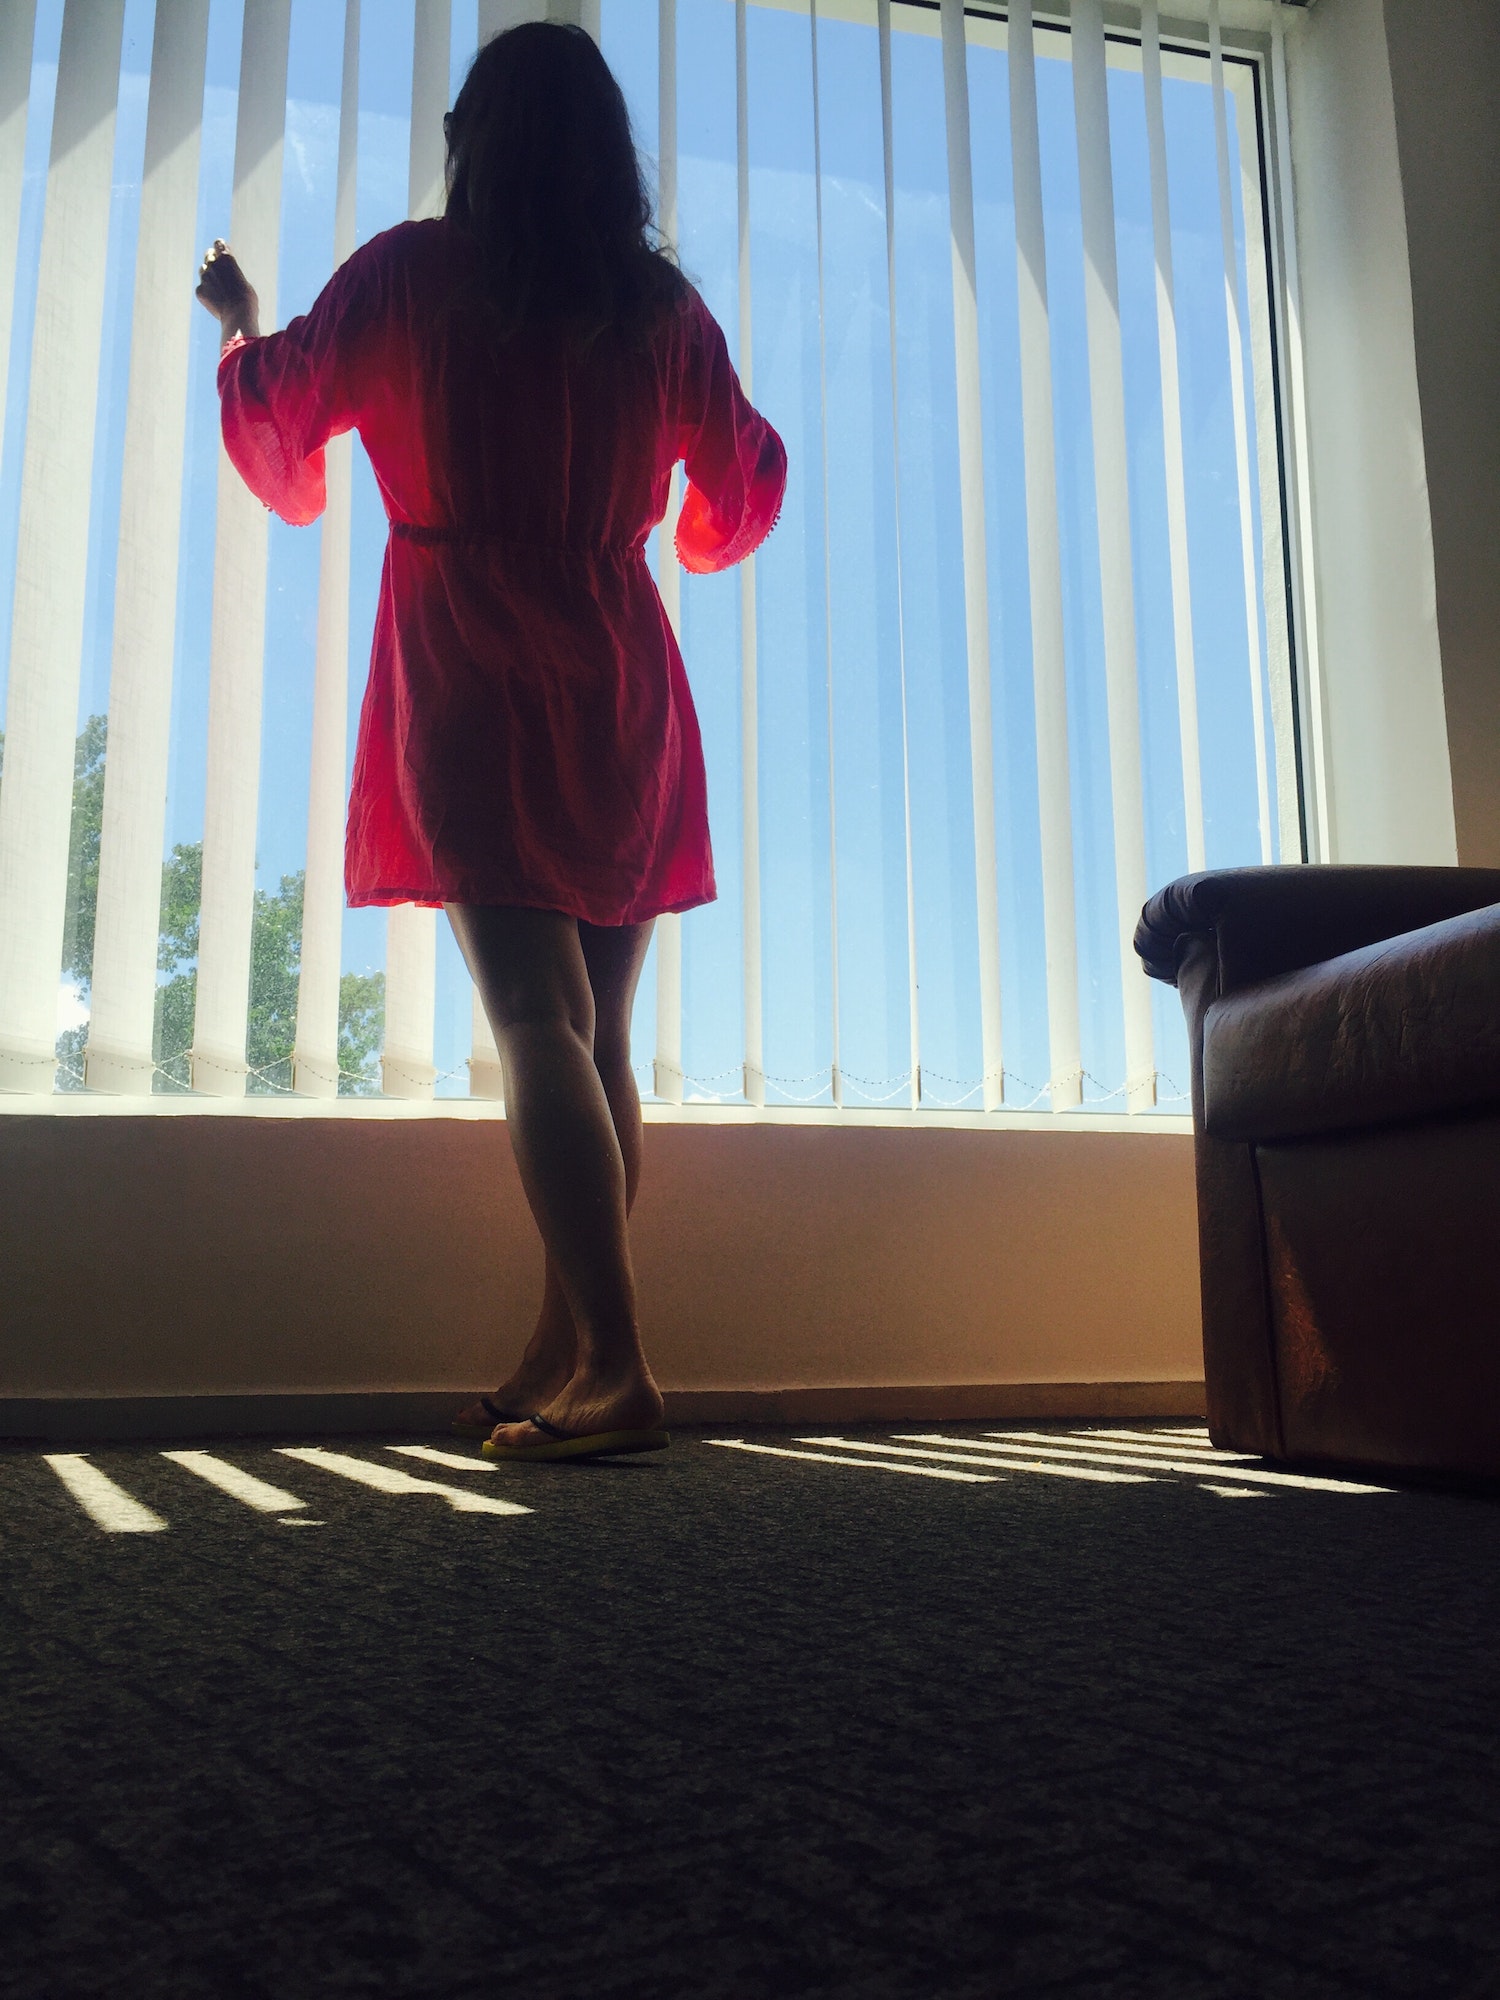 Woman standing near the window blinds